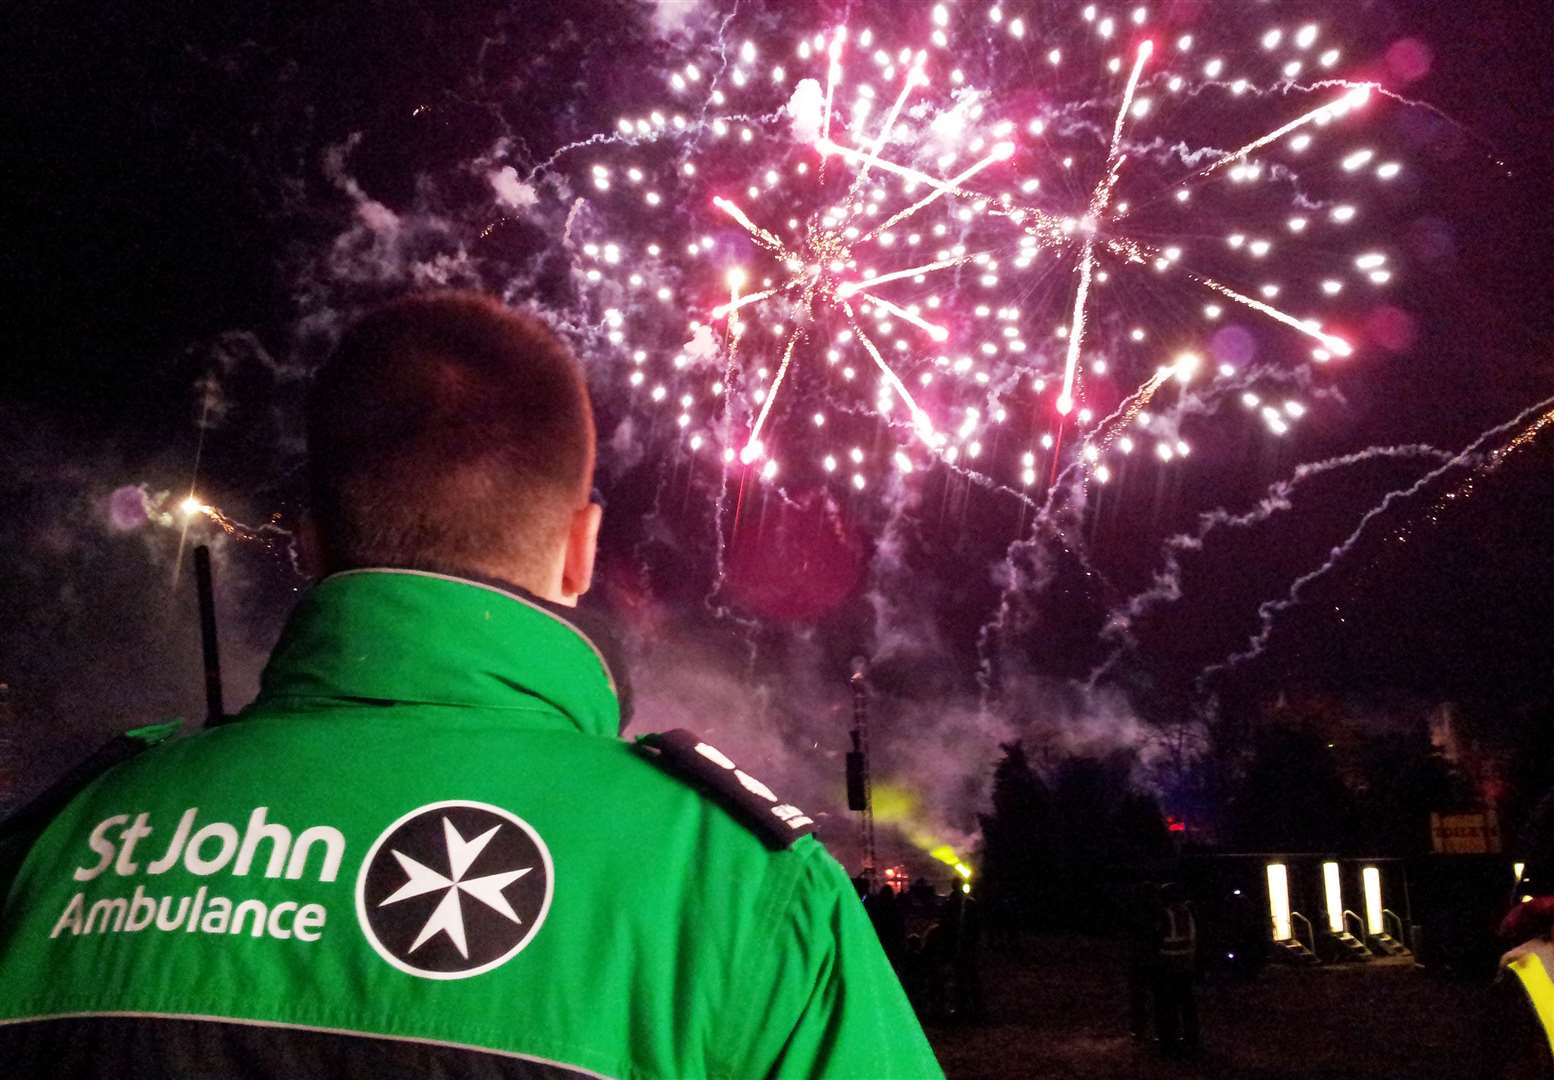 St John Ambulance is asking people to be familiar with some basic first aid actions before attending Bonfire Night celebrations